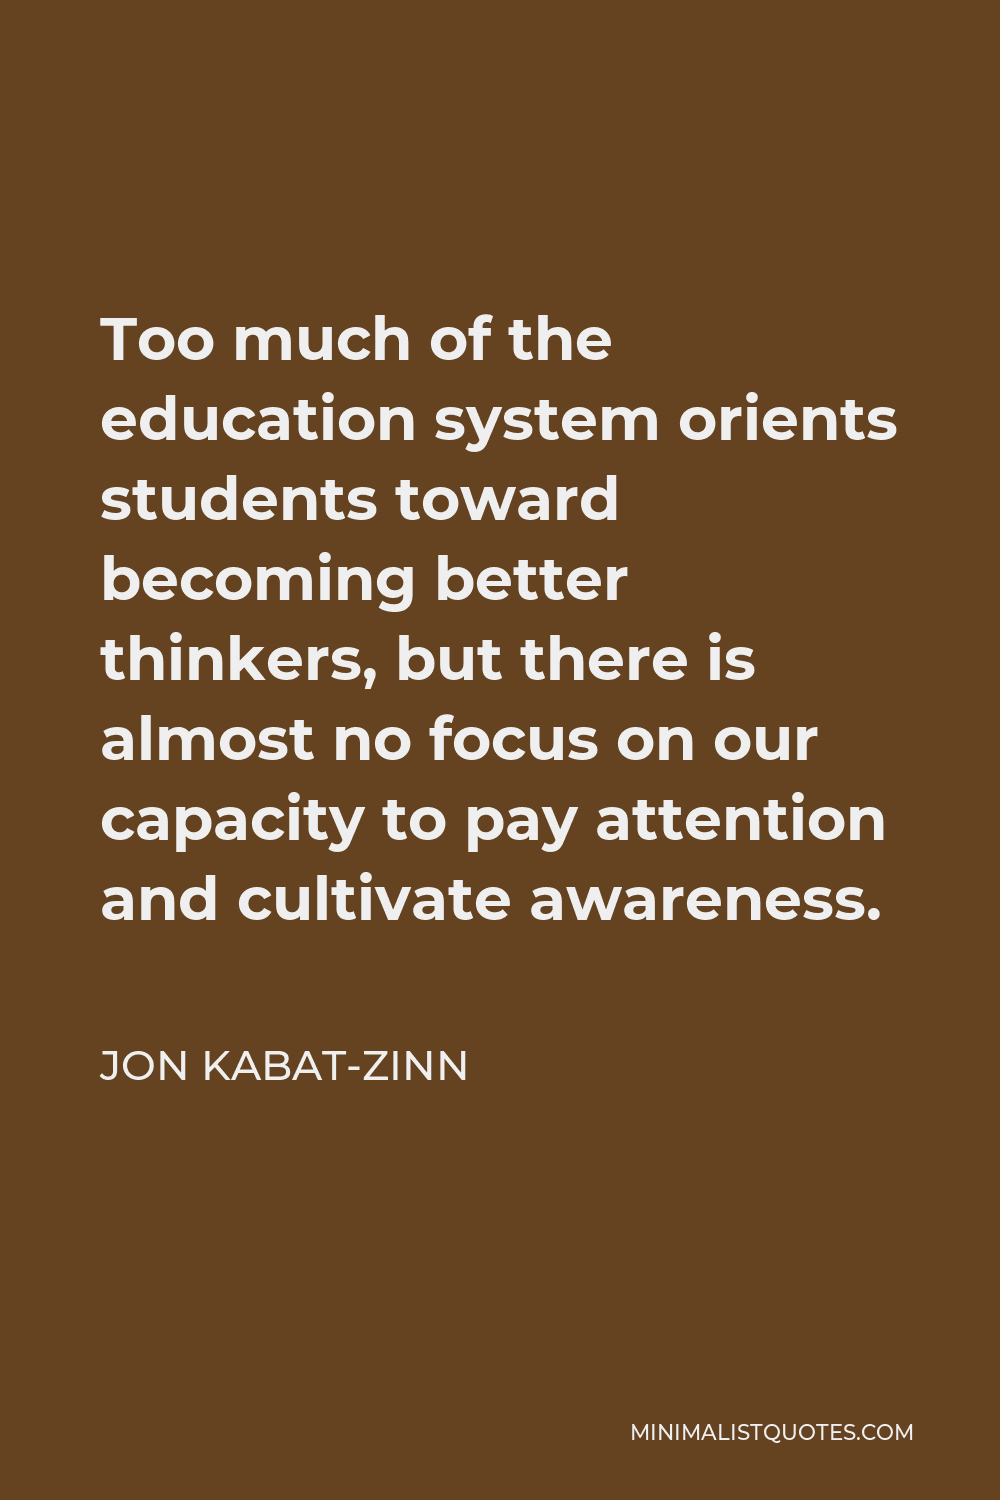 Jon Kabat-Zinn Quote - Too much of the education system orients students toward becoming better thinkers, but there is almost no focus on our capacity to pay attention and cultivate awareness.